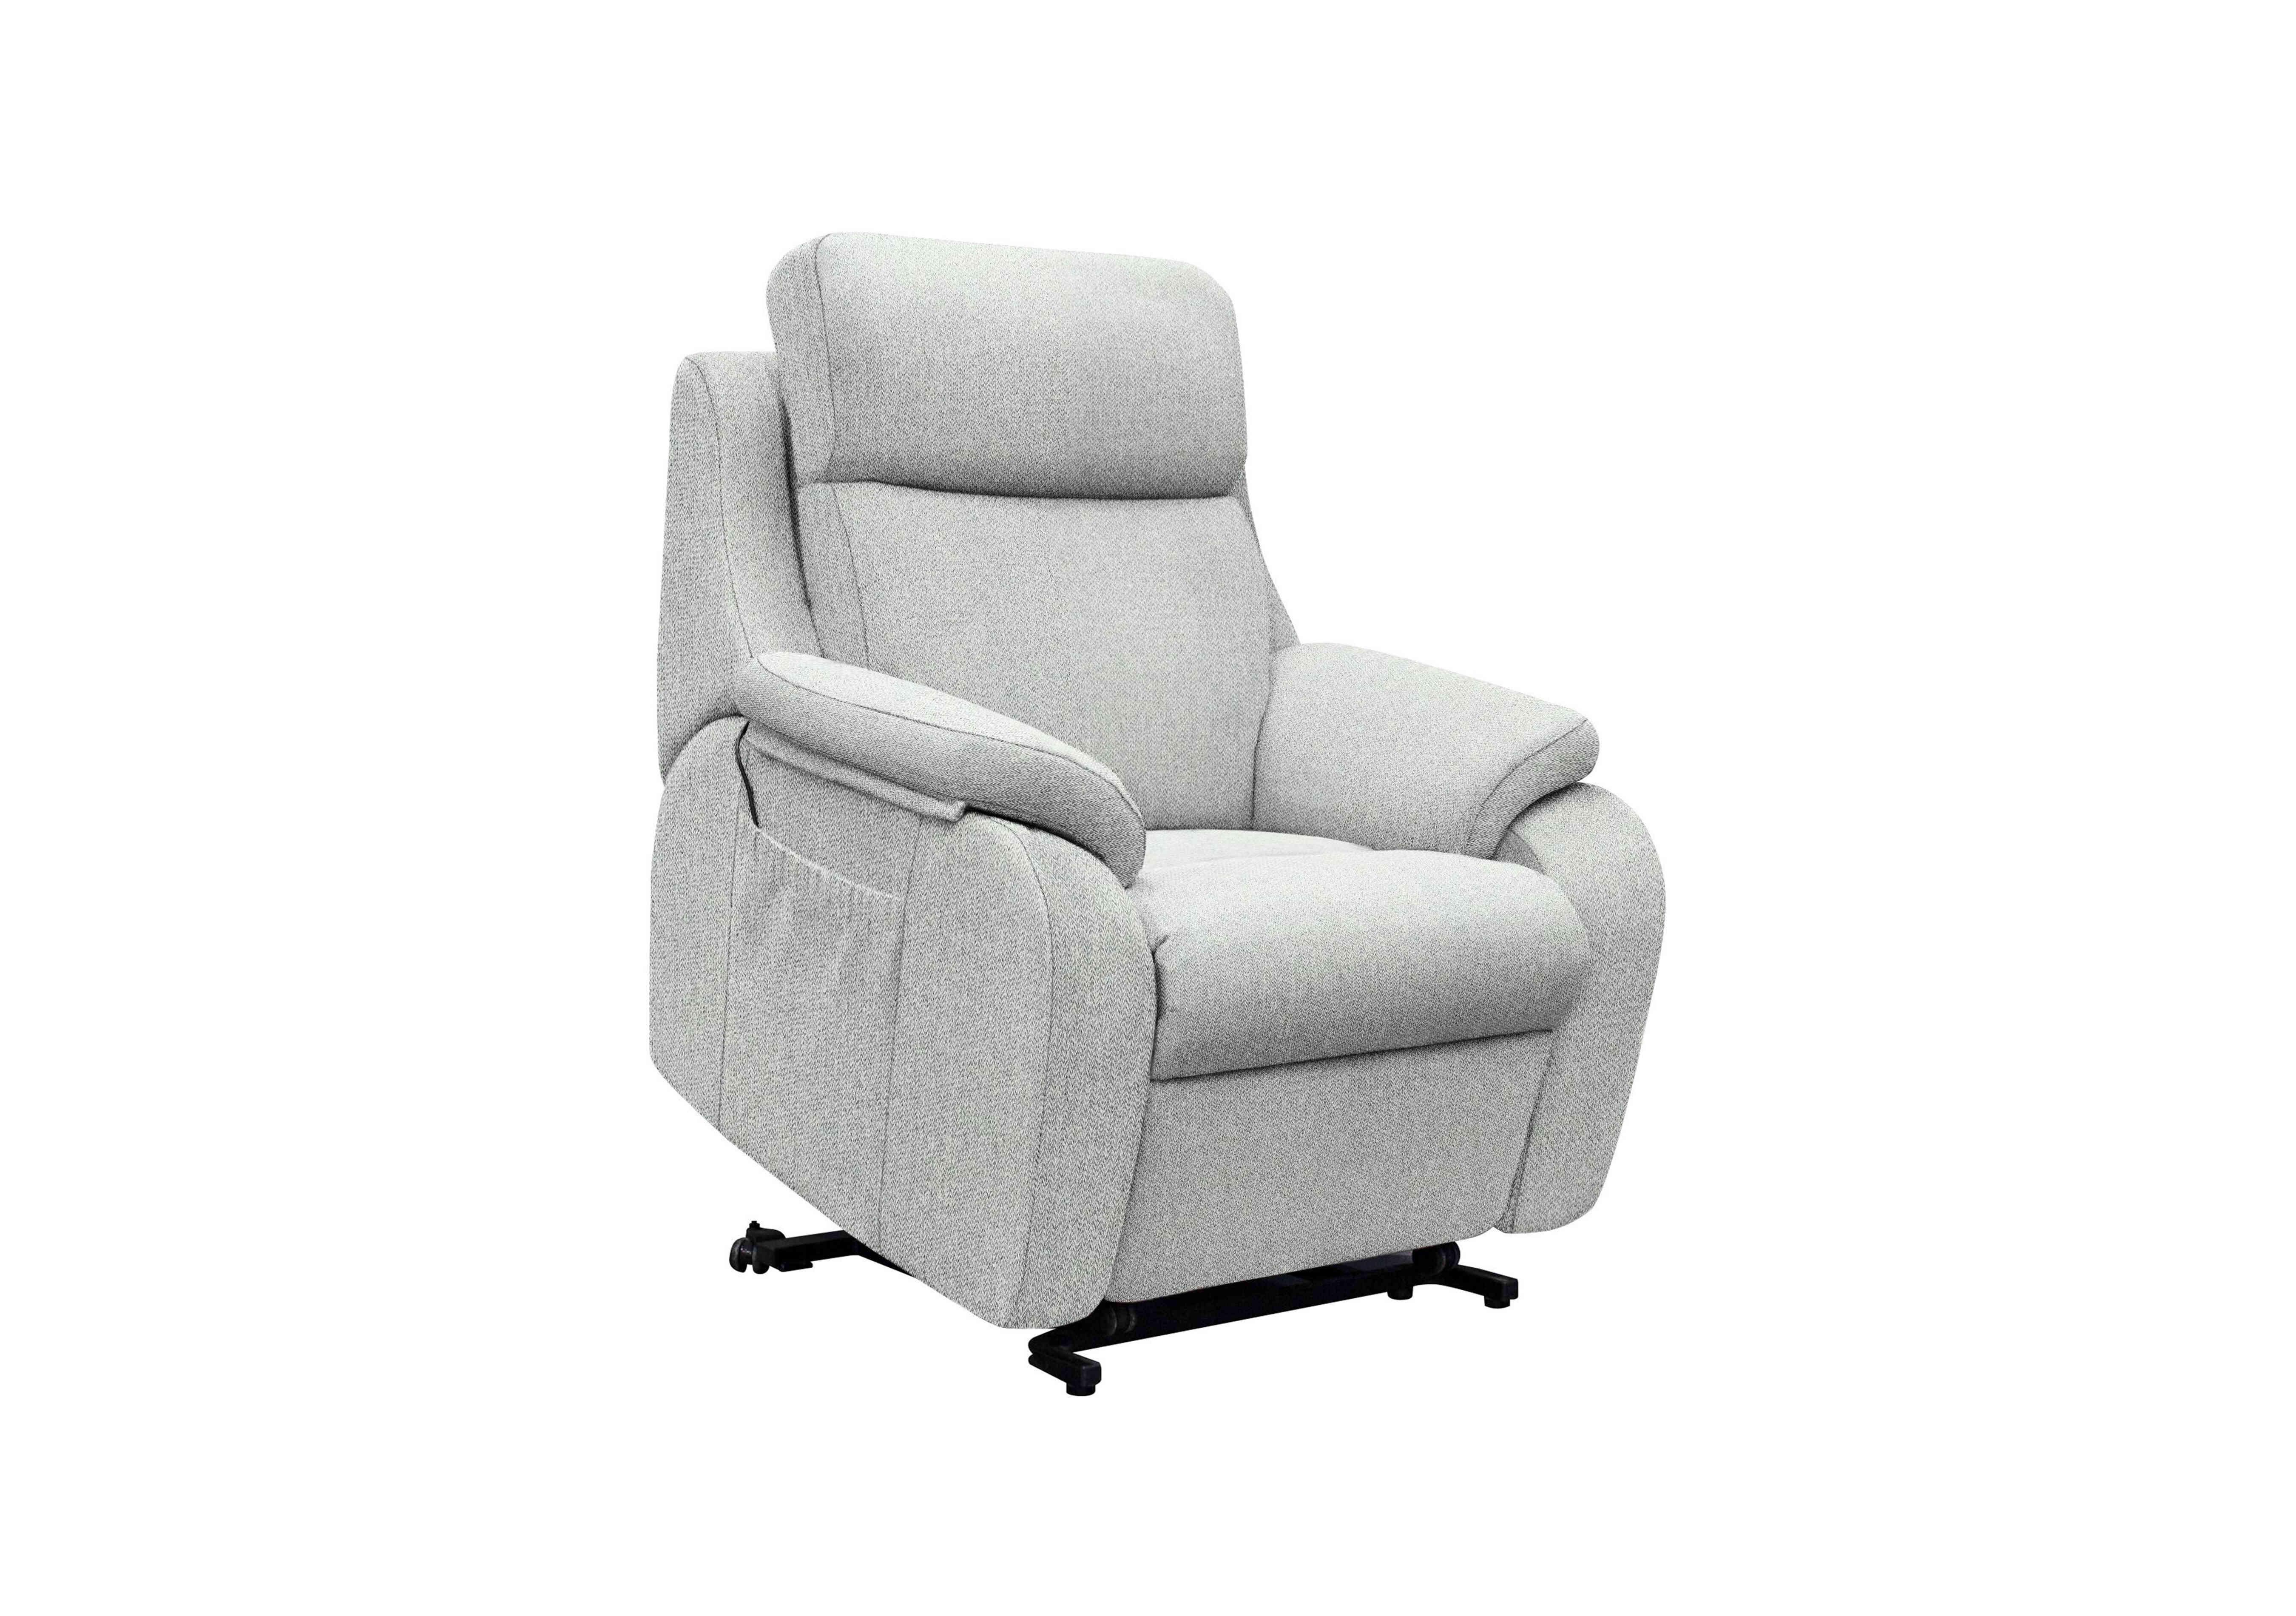 Kingsbury Large Fabric Lift and Rise Chair in A011 Swift Cygnet on Furniture Village